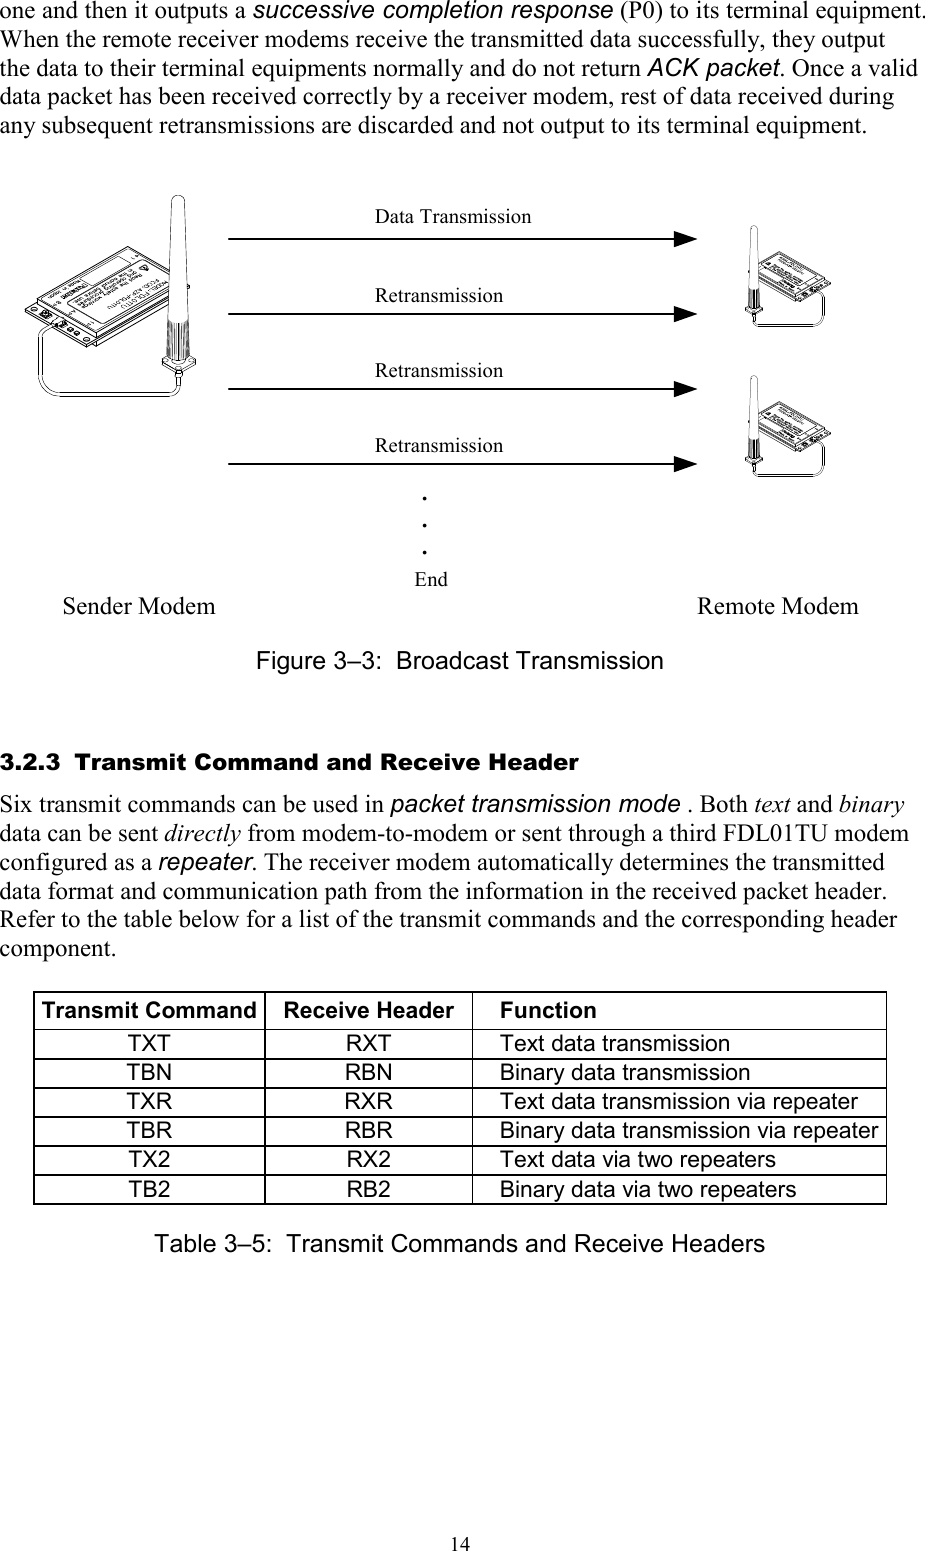   14one and then it outputs a successive completion response (P0) to its terminal equipment. When the remote receiver modems receive the transmitted data successfully, they output the data to their terminal equipments normally and do not return ACK packet. Once a valid data packet has been received correctly by a receiver modem, rest of data received during any subsequent retransmissions are discarded and not output to its terminal equipment.               Sender Modem                                                                             Remote Modem Figure 3–3:  Broadcast Transmission 3.2.3  Transmit Command and Receive Header Six transmit commands can be used in packet transmission mode . Both text and binary data can be sent directly from modem-to-modem or sent through a third FDL01TU modem configured as a repeater. The receiver modem automatically determines the transmitted data format and communication path from the information in the received packet header. Refer to the table below for a list of the transmit commands and the corresponding header component.  Transmit Command Receive Header  Function TXT  RXT  Text data transmission TBN  RBN  Binary data transmission TXR  RXR  Text data transmission via repeater TBR  RBR  Binary data transmission via repeater TX2  RX2  Text data via two repeaters TB2  RB2  Binary data via two repeaters Table 3–5:  Transmit Commands and Receive Headers Data Transmission Retransmission Retransmission Retransmission ・ ・ ・ End 